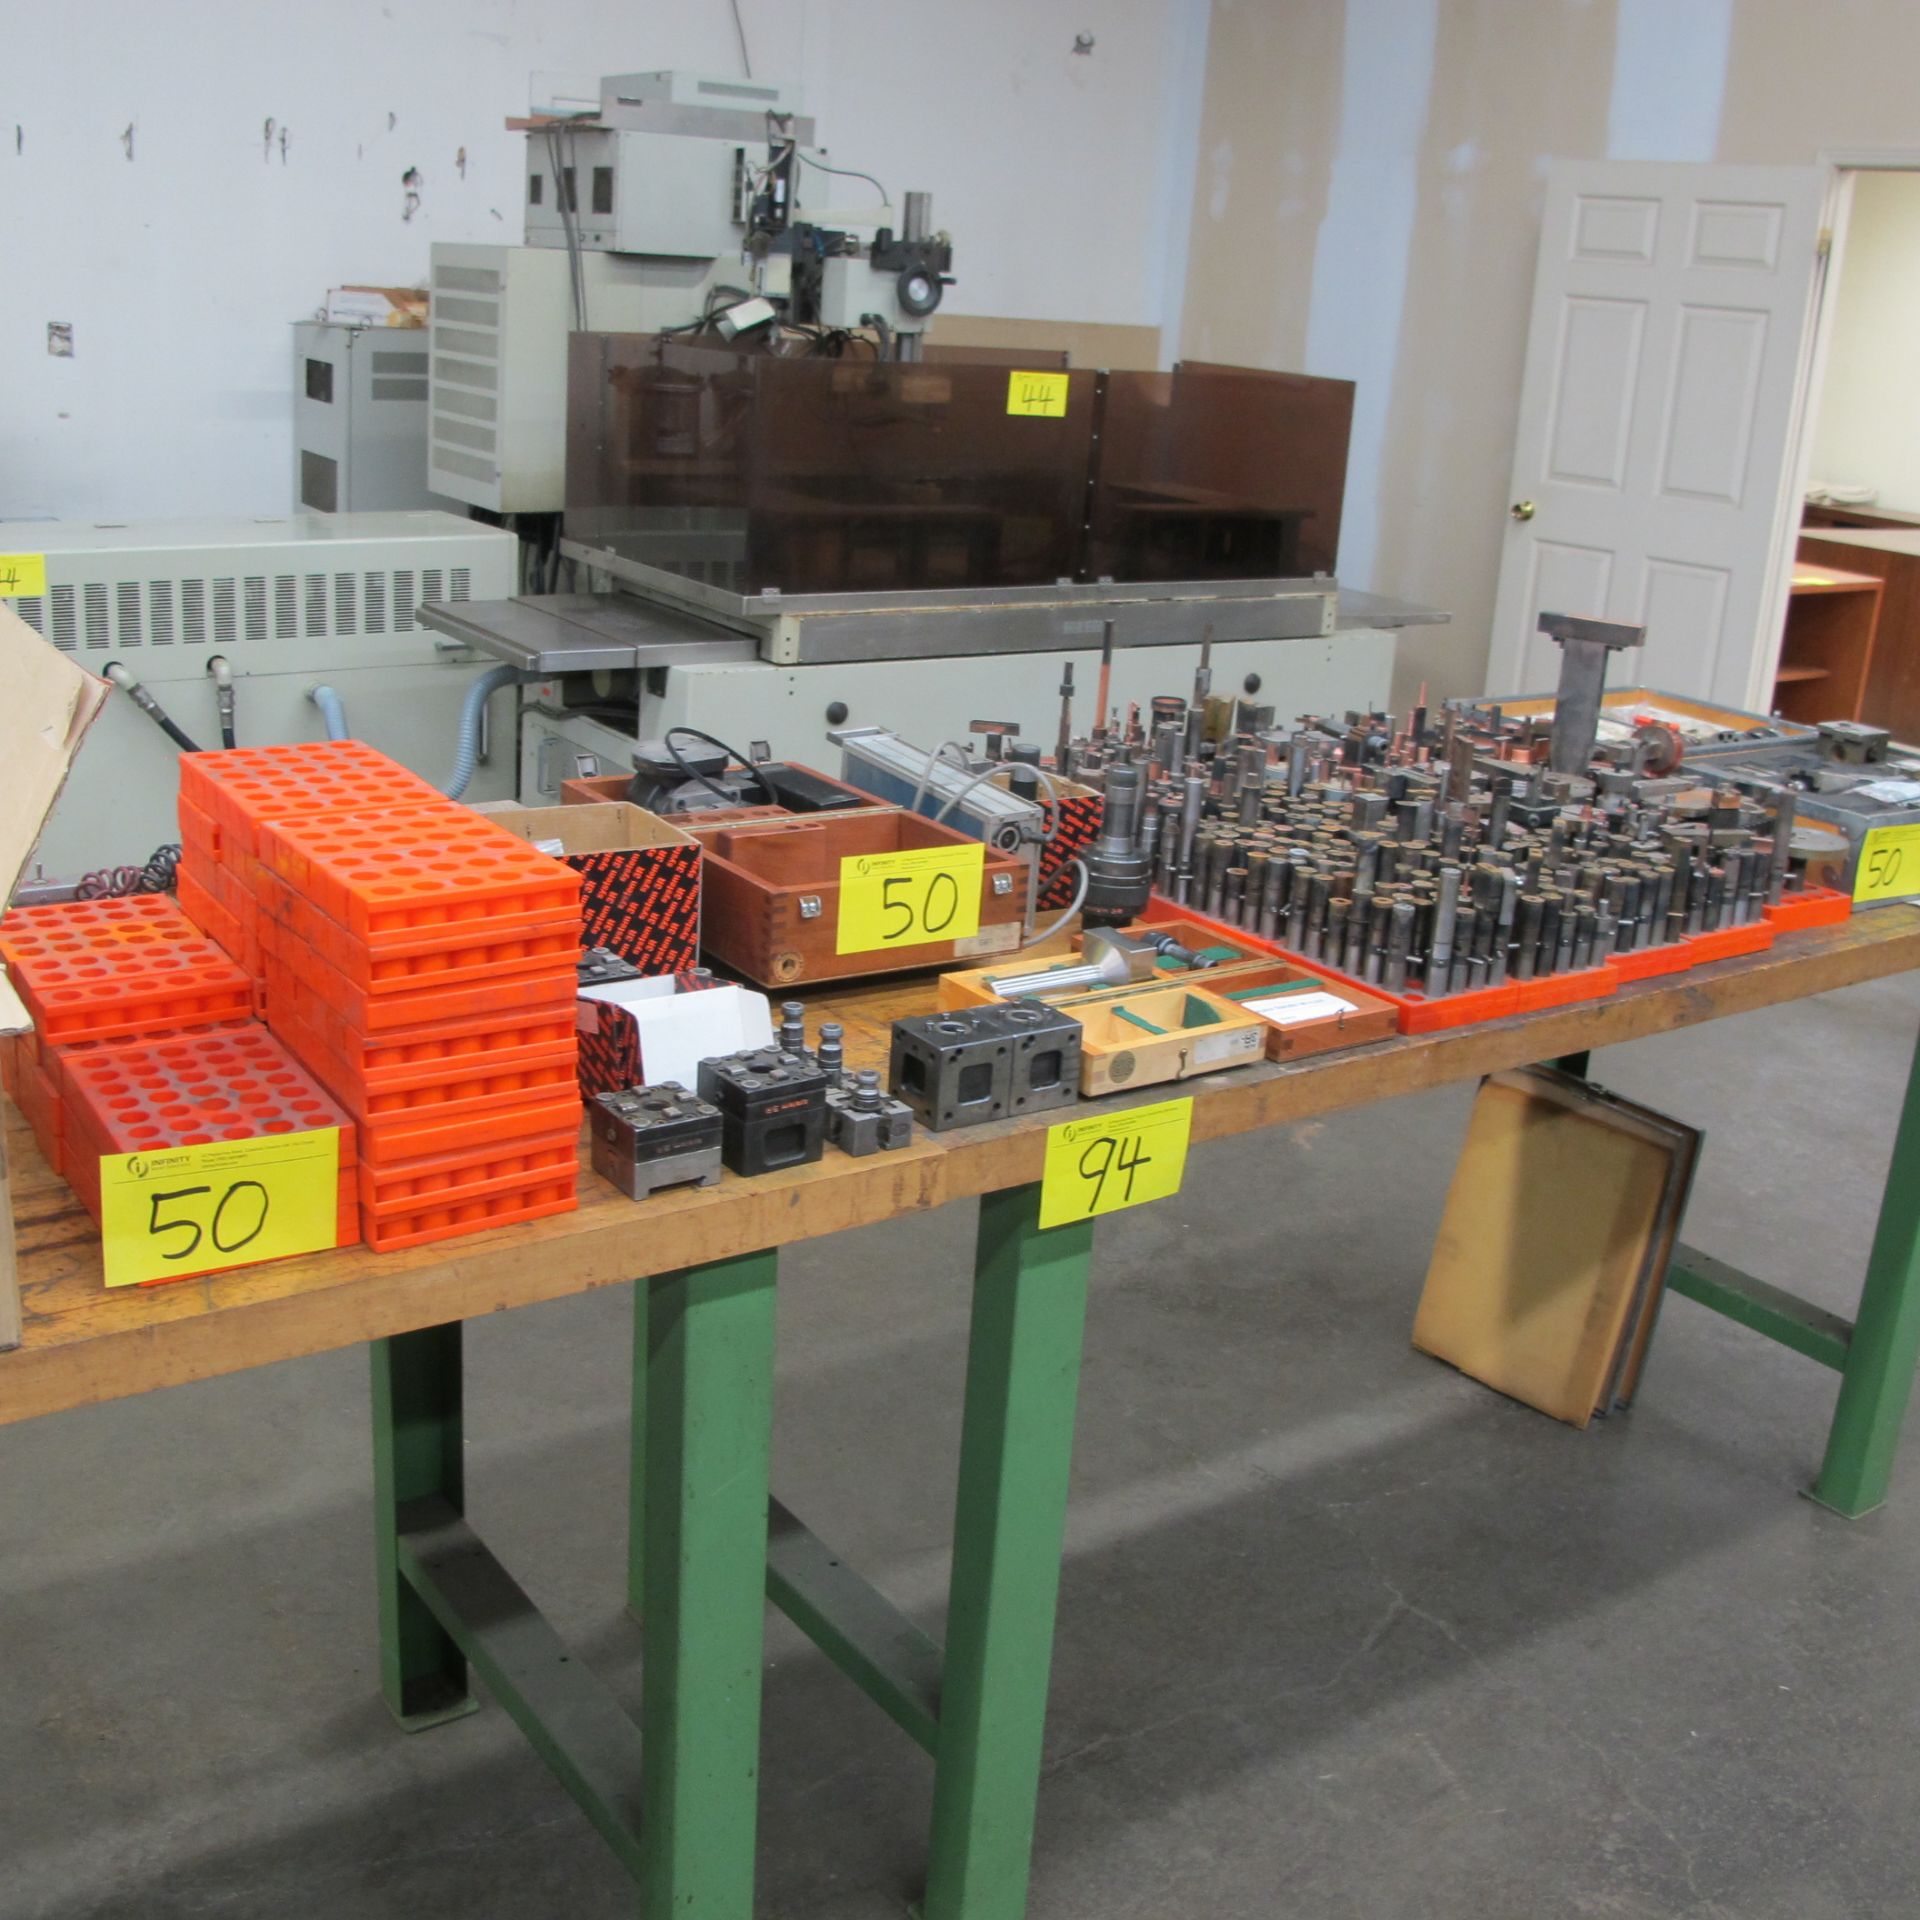 LOT OF SYSTEM R3 EDM BLOCKS, TRAYS, SPINDLES, SPEED CONTROLLER AND ELECTRODES